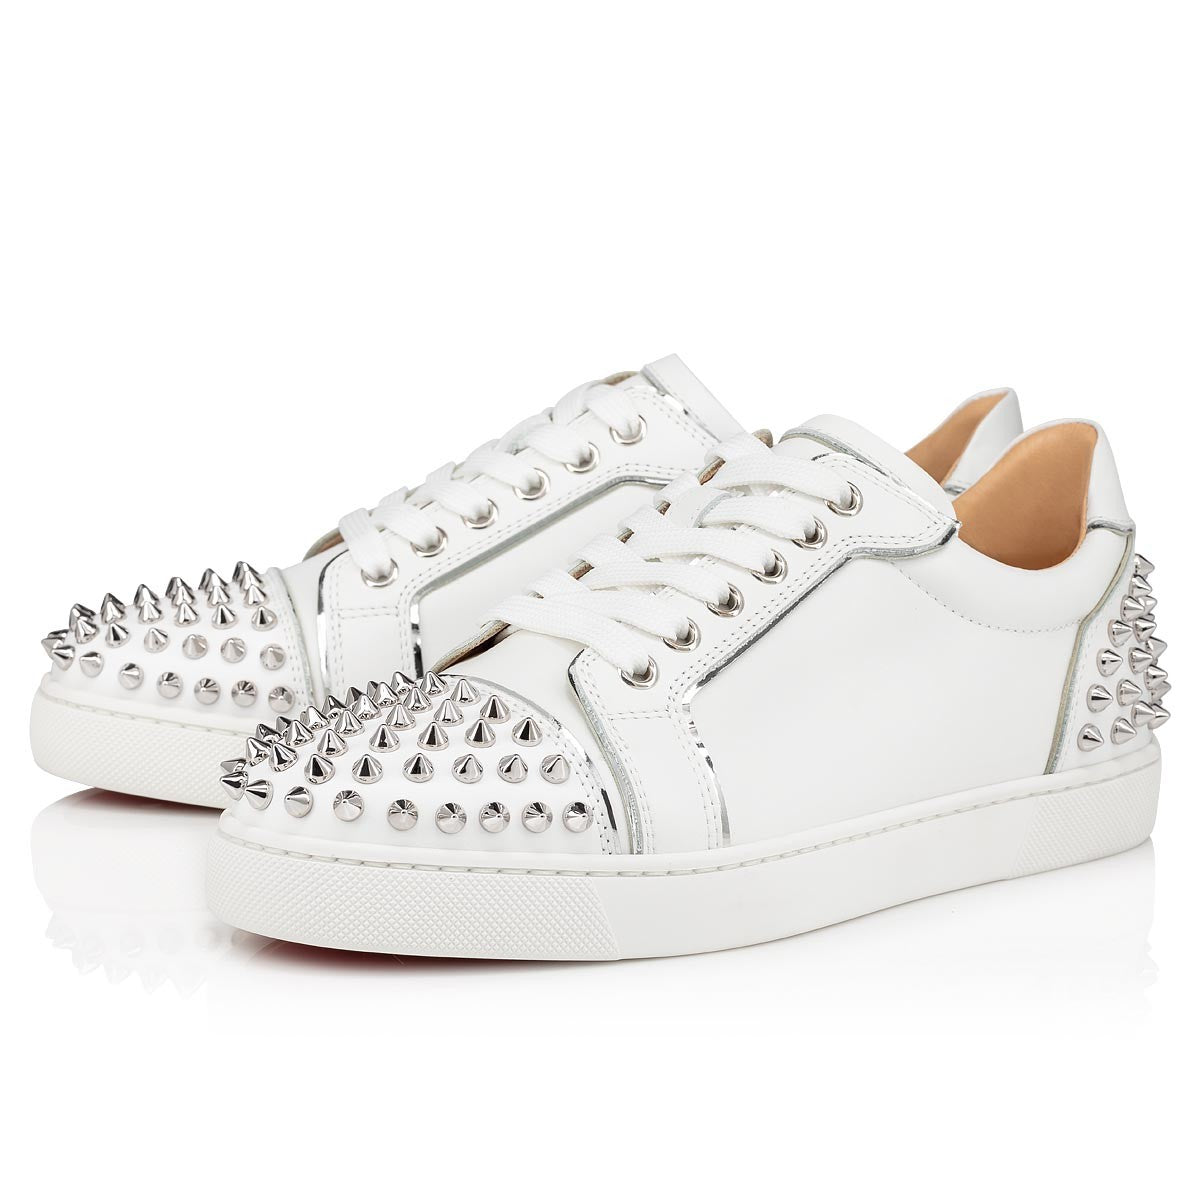 Vieira 2 Calf Leather and Specchio Leather Bianco Sneakers